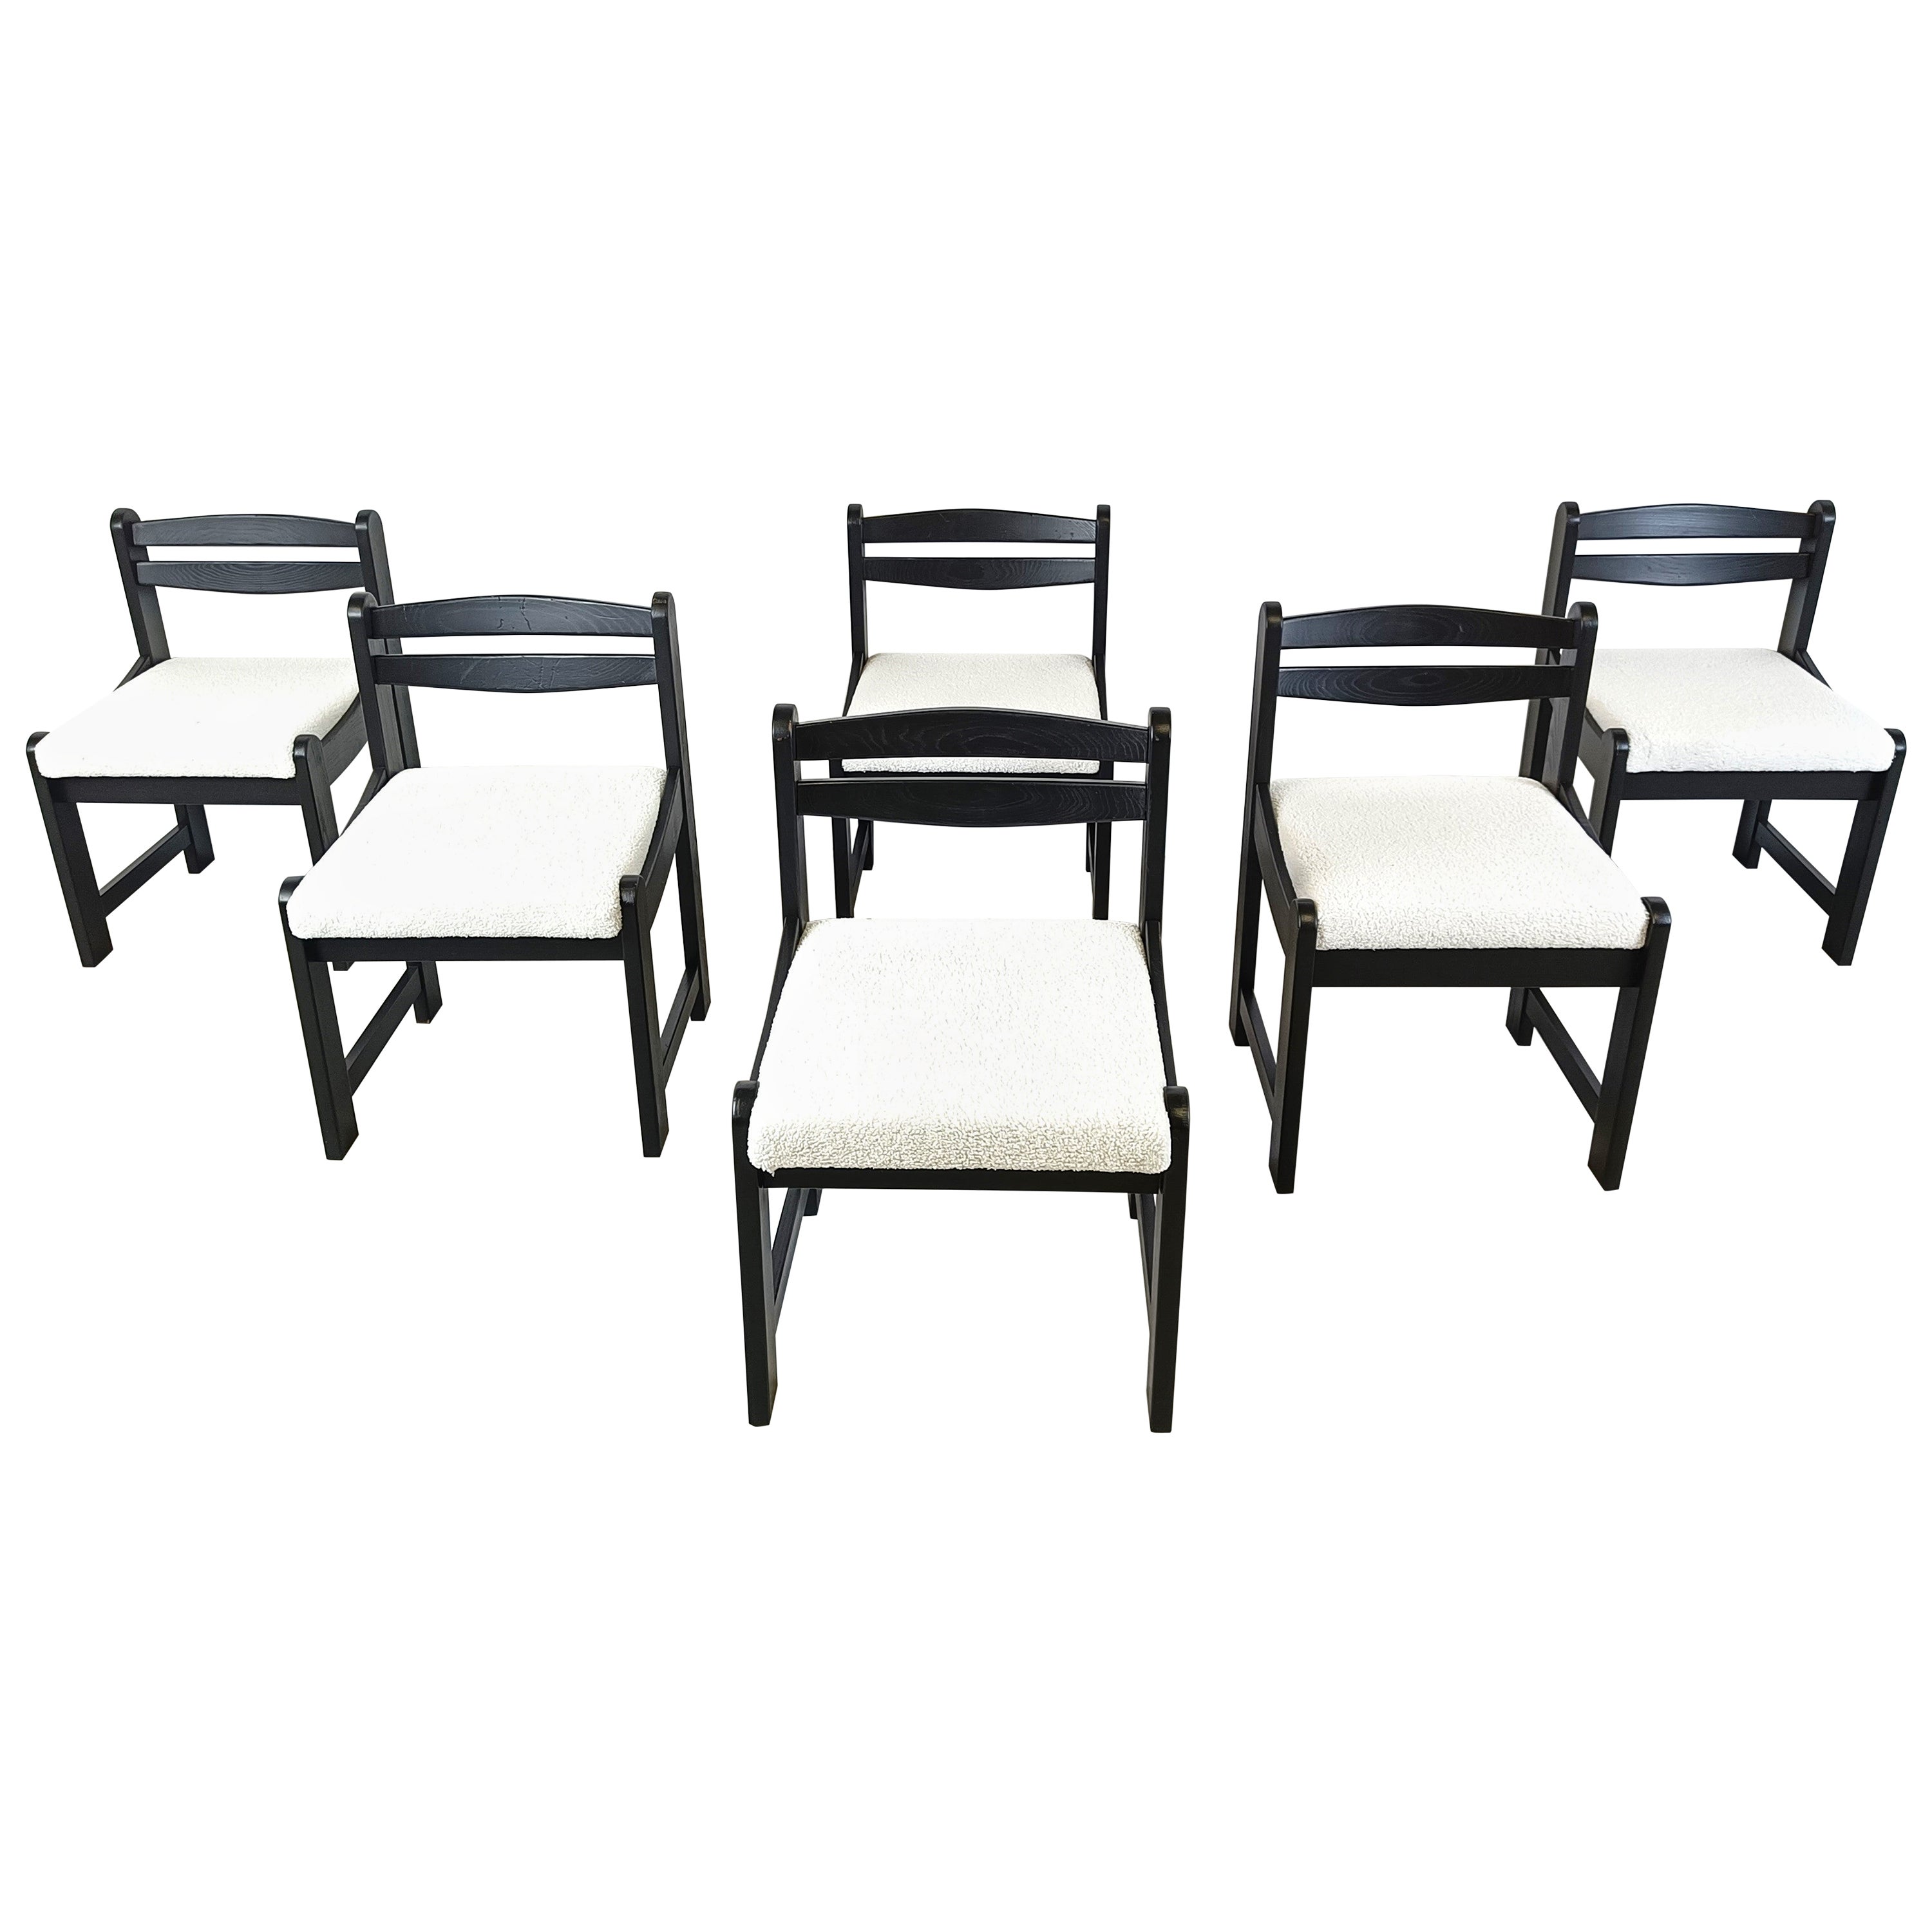 Vintage brutalist dining chairs, set of 6 - 1970s For Sale